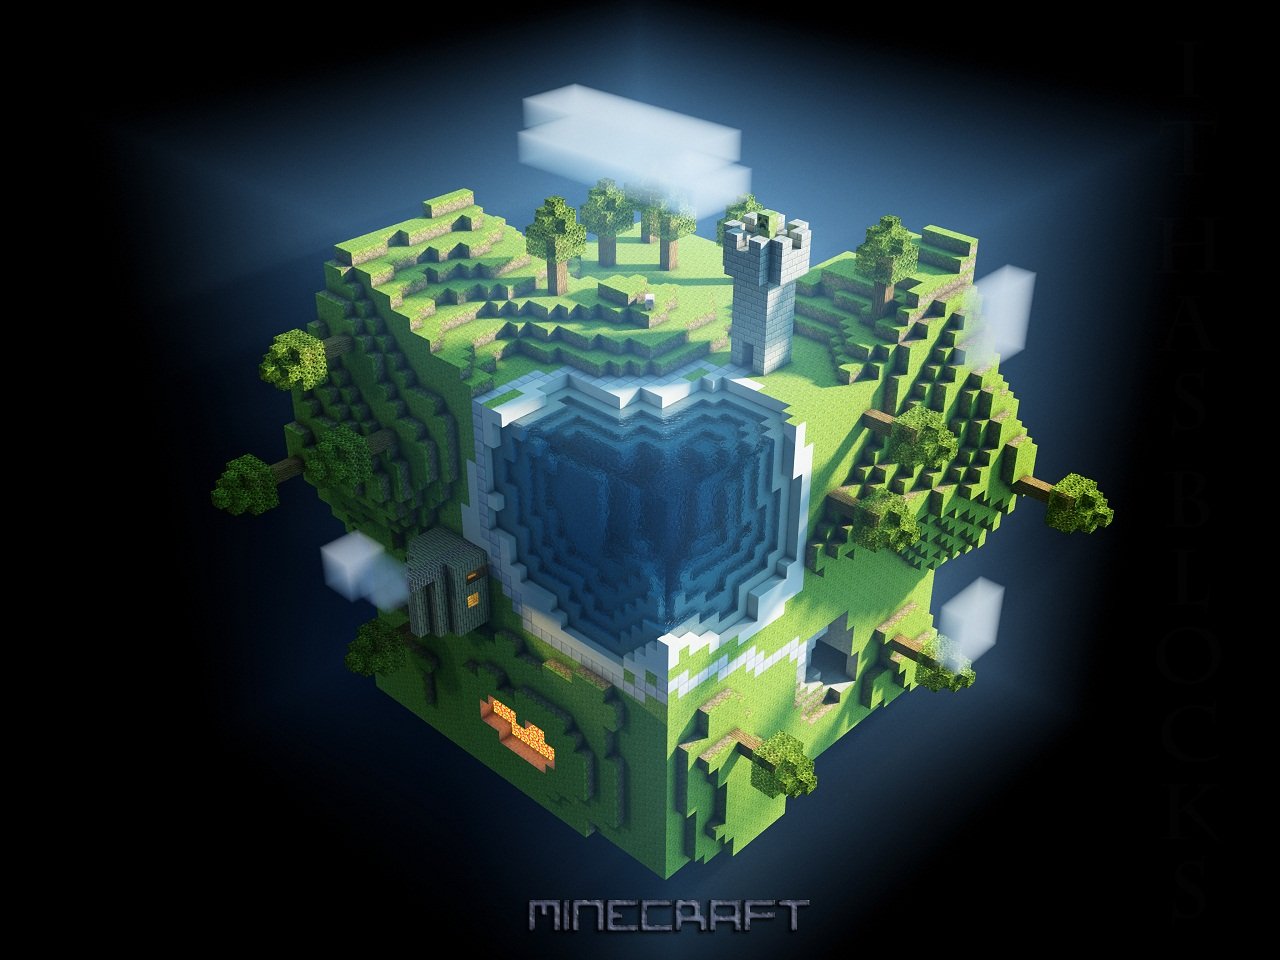  Awesome Minecraft wallpapers in HD Design Utopia Trend